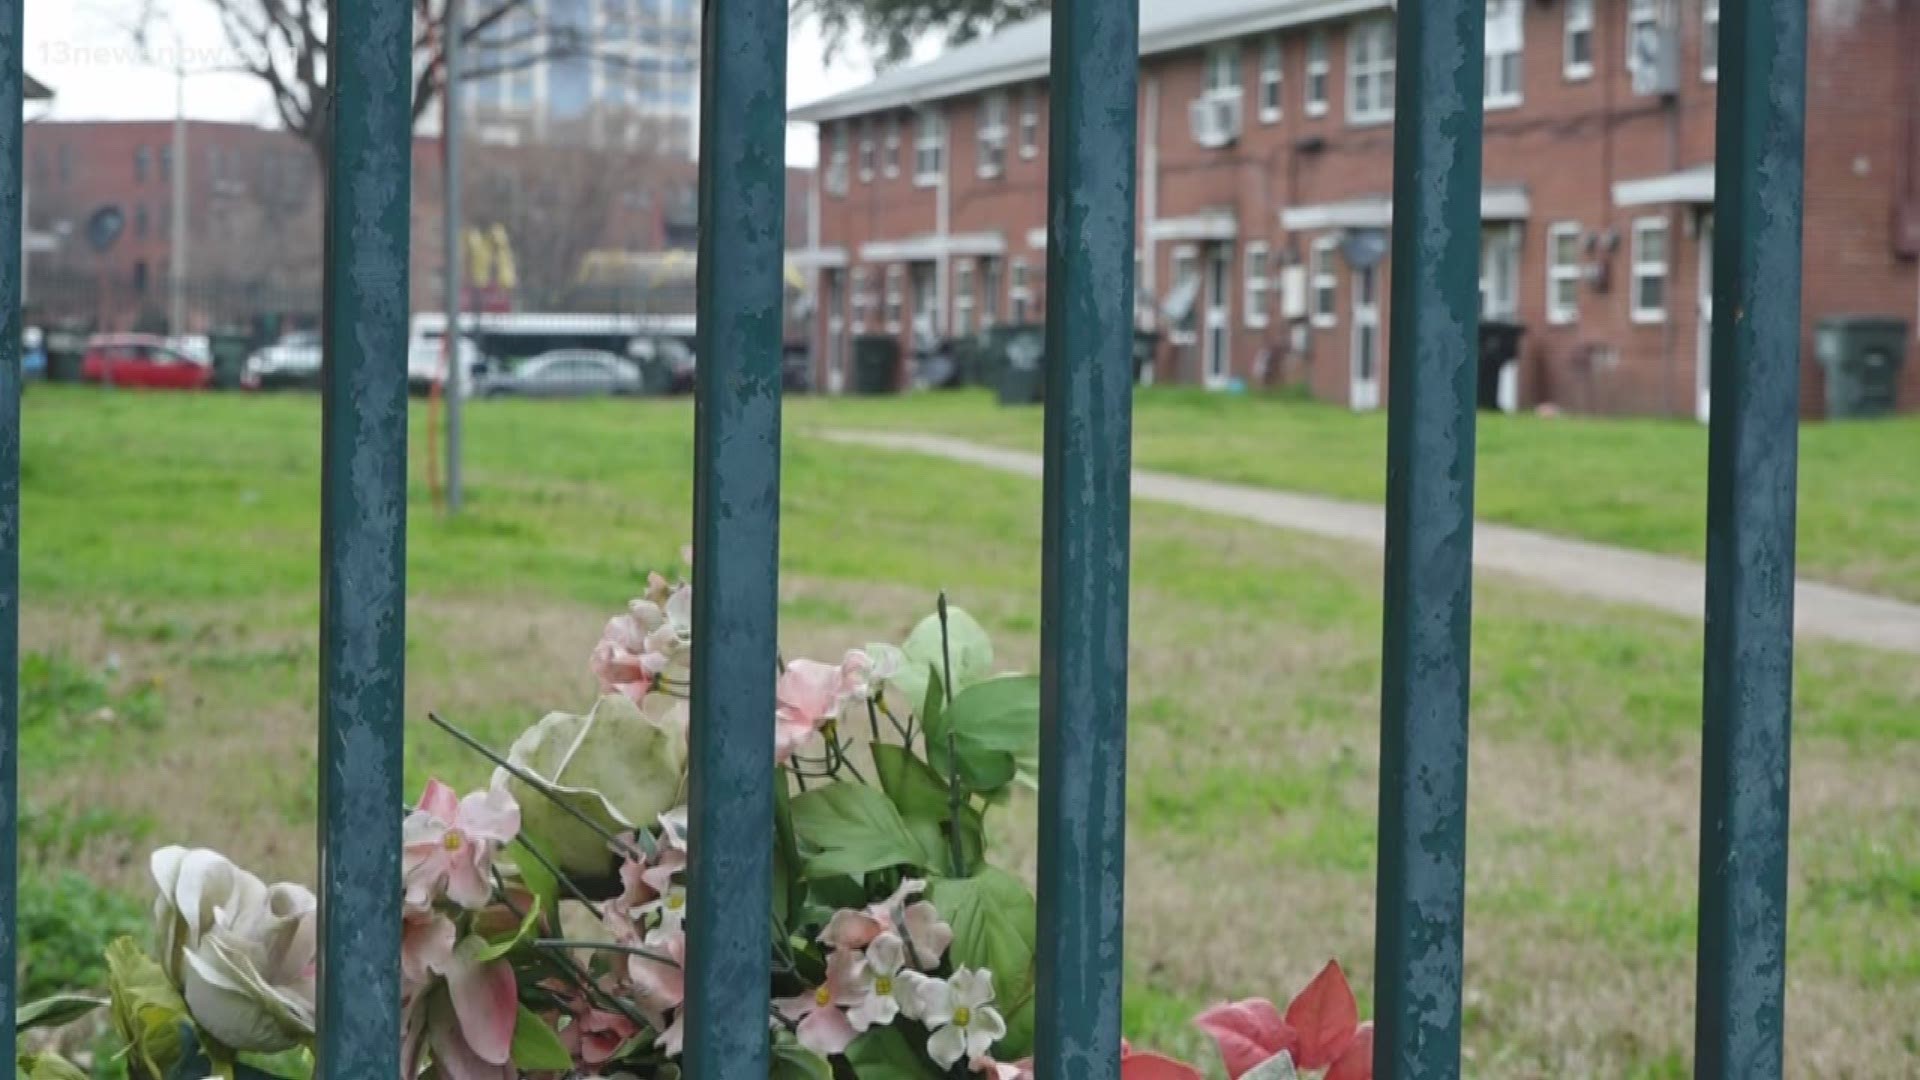 Families in Tidewater Gardens are moving ahead of being forced out of their homes as the city works to revitalize the St. Paul's neighborhood.